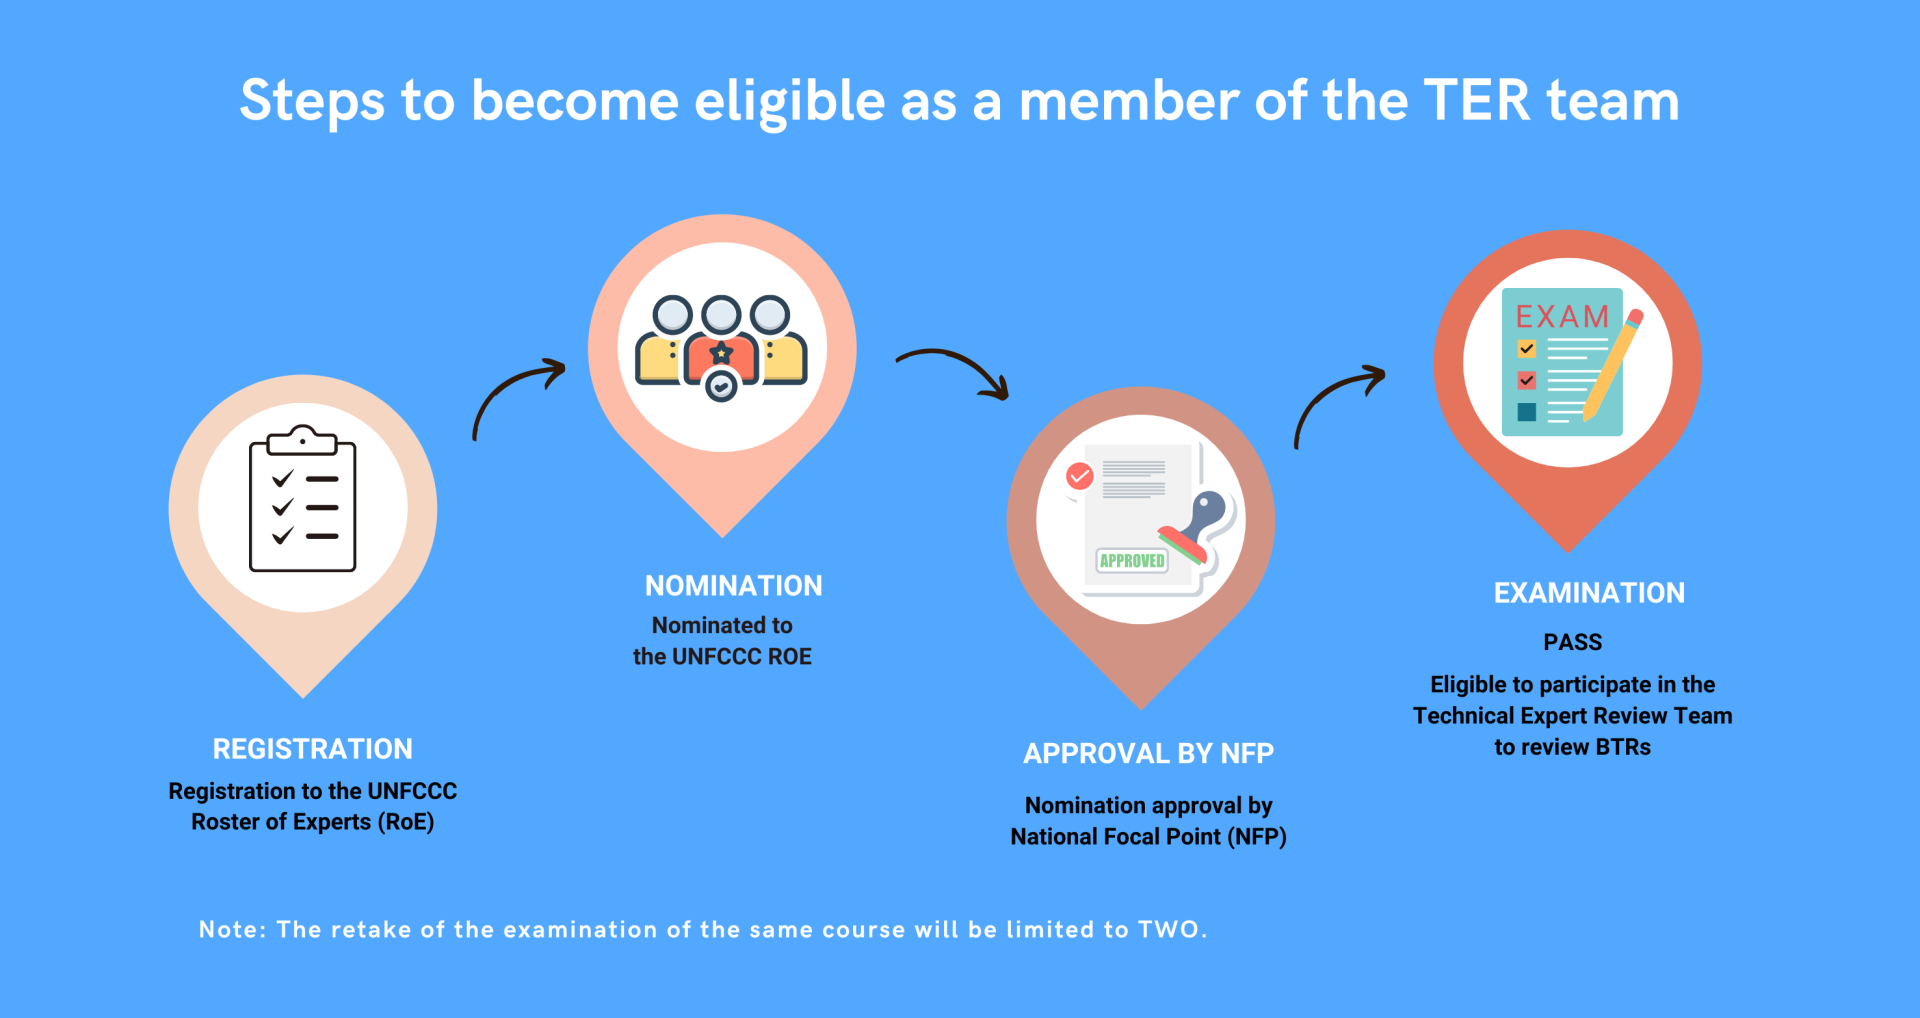 Steps to become eligible for TERT